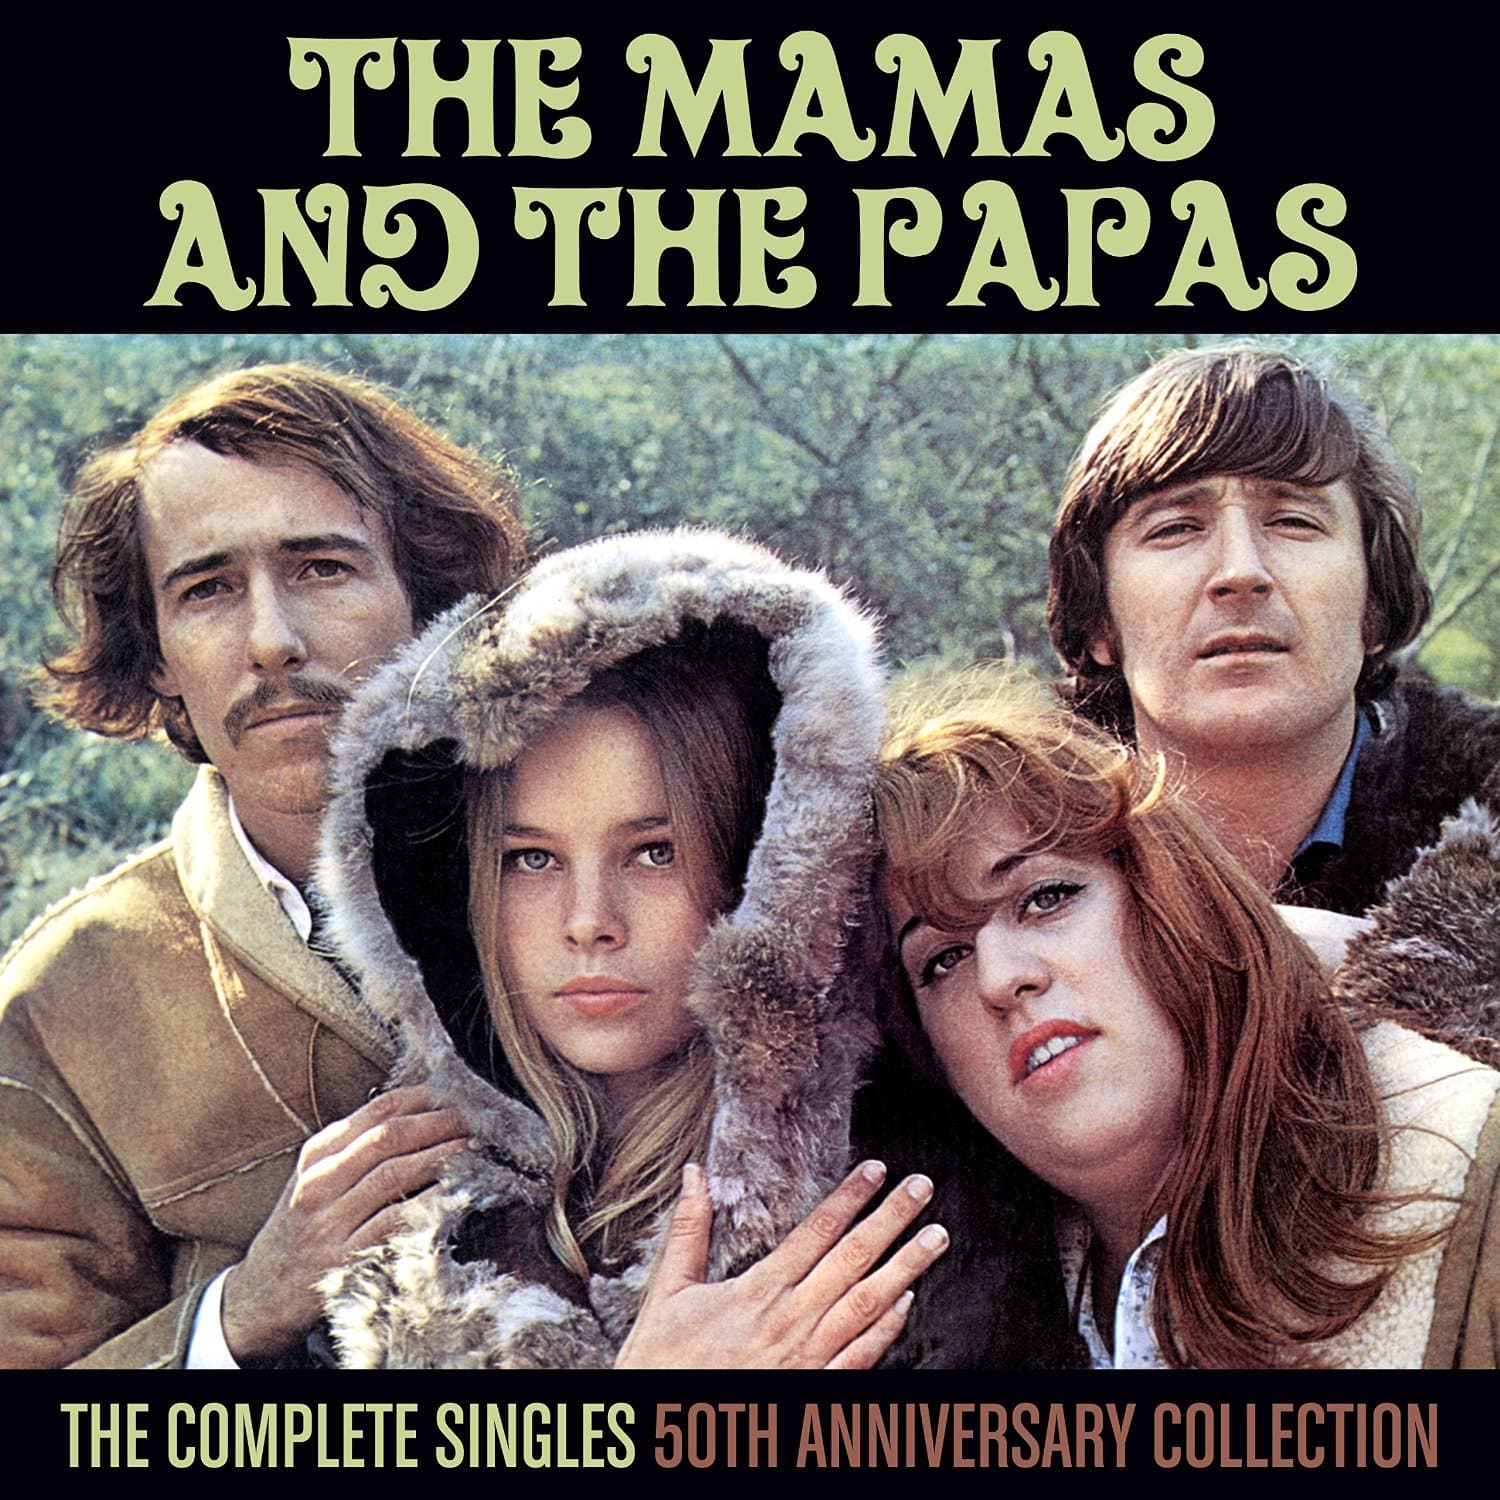 California Dreamin’: Real Gone Collects The Mamas and the Papas